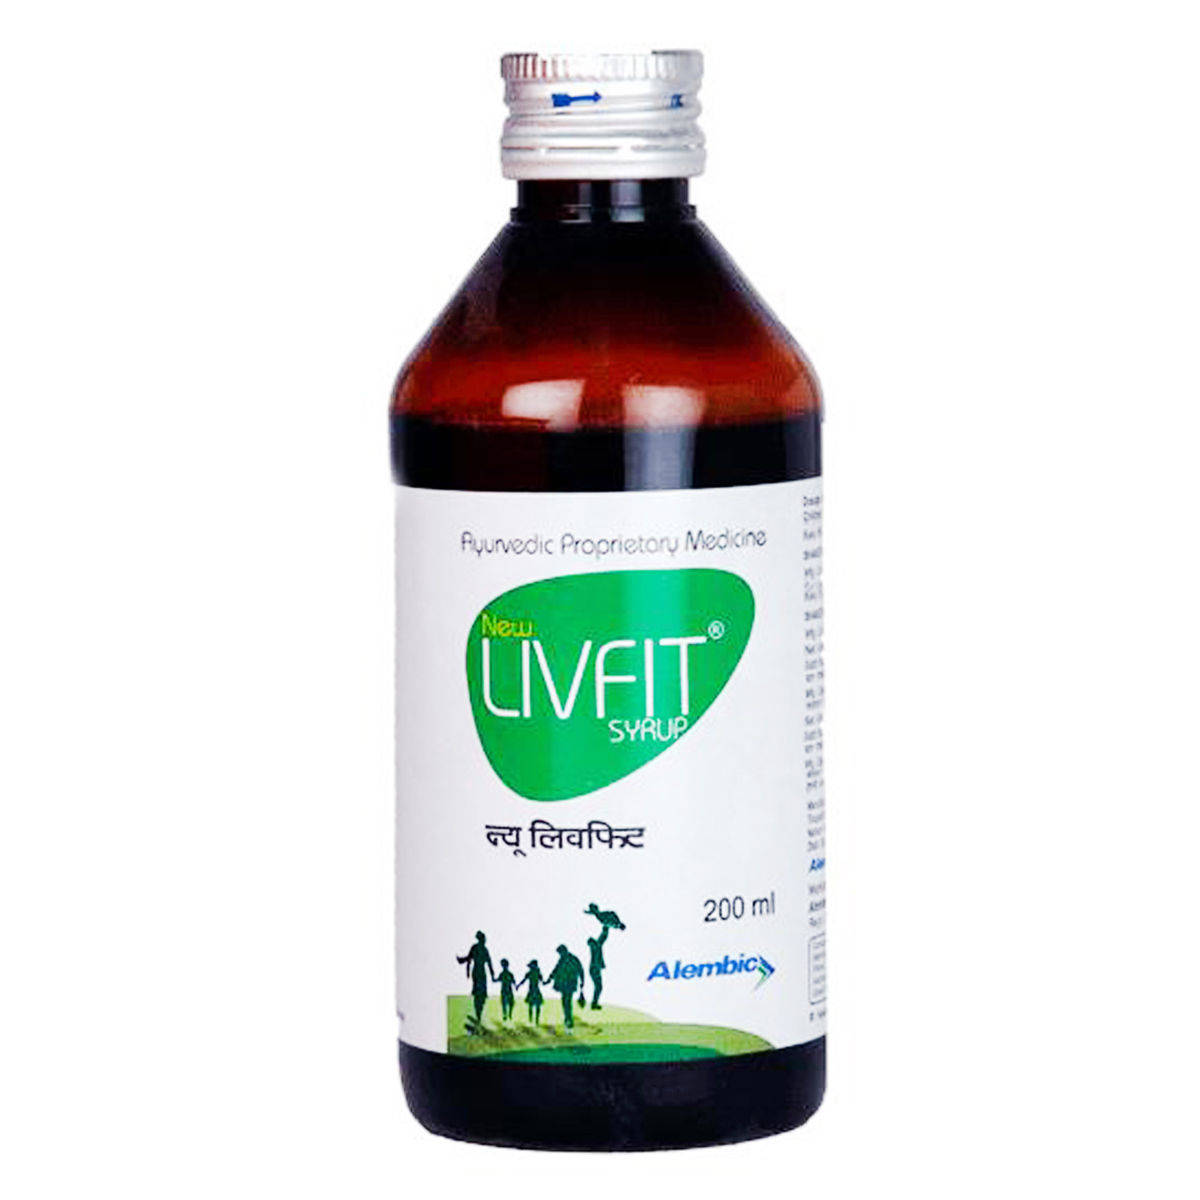 New Livfit Syrup 200 ml, Pack of 1 